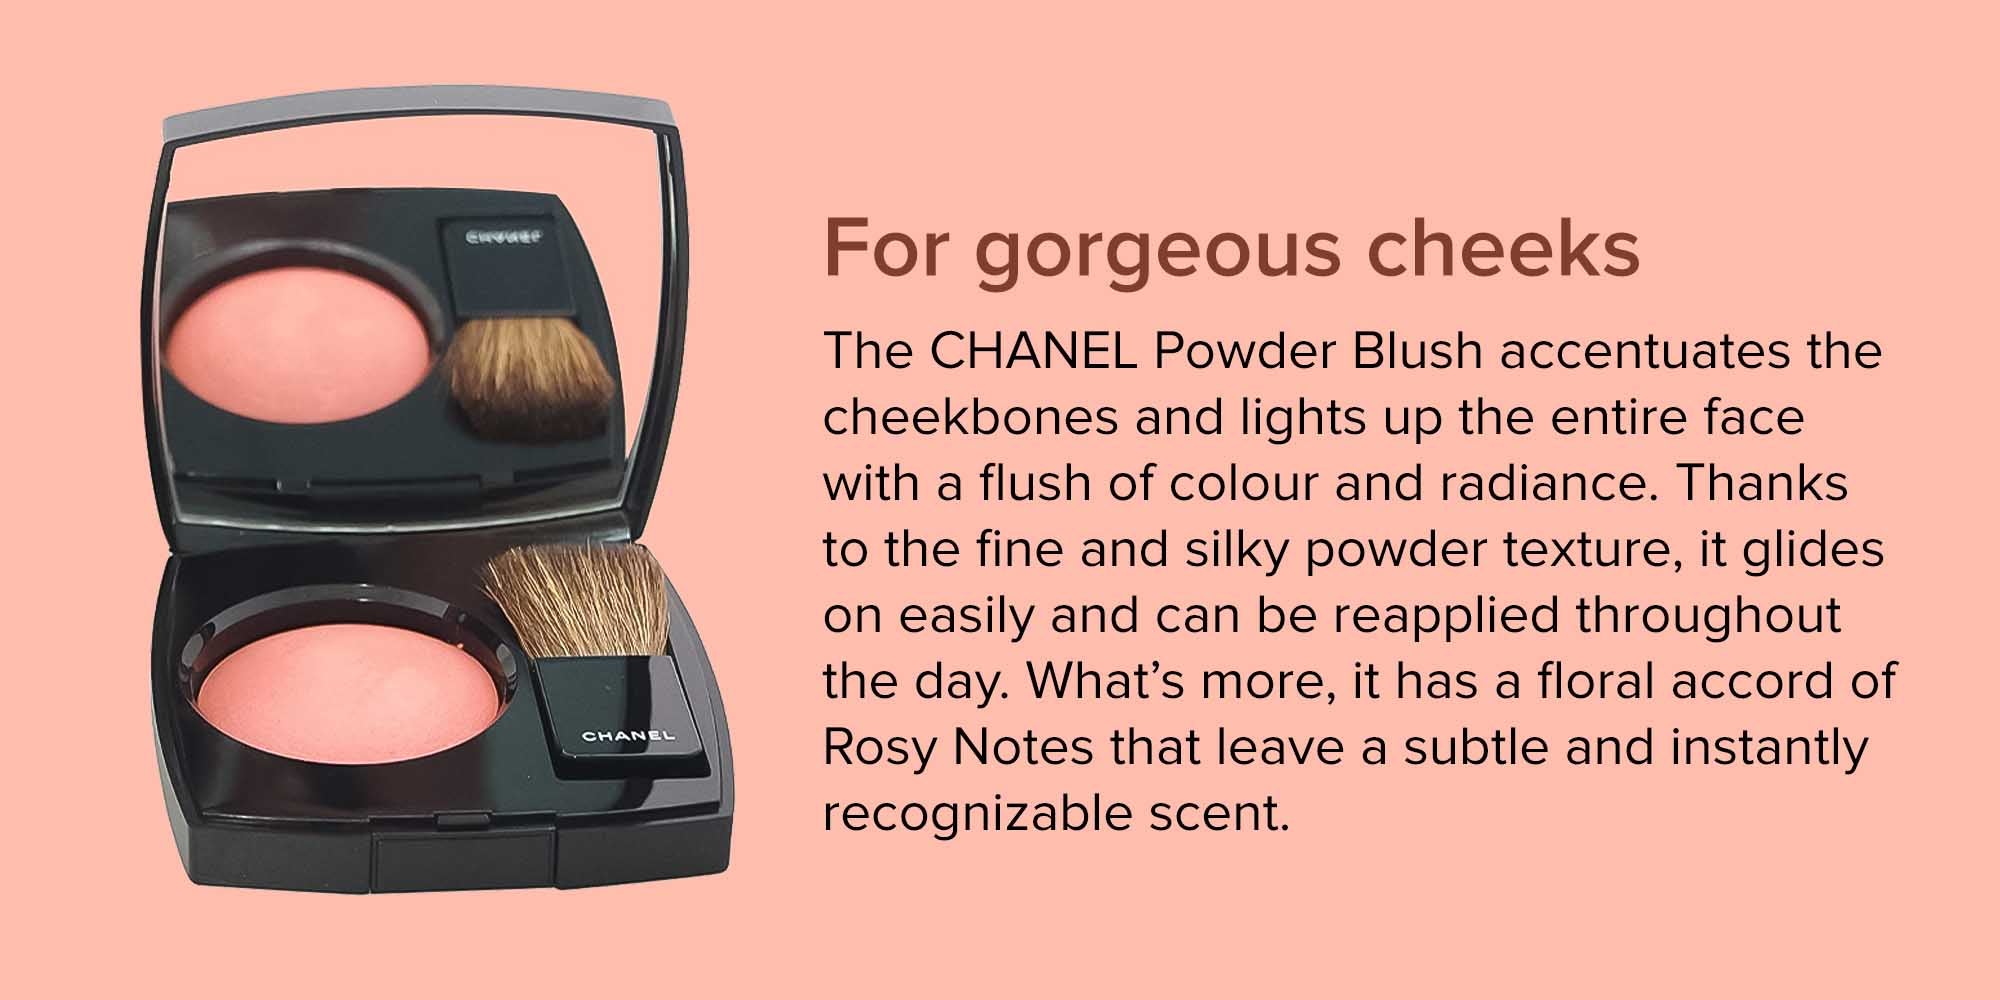 Generic Chanel Powder Blush - No. 72 Rose Initiale 4G/0.14Oz - Price in  India, Buy Generic Chanel Powder Blush - No. 72 Rose Initiale 4G/0.14Oz  Online In India, Reviews, Ratings & Features